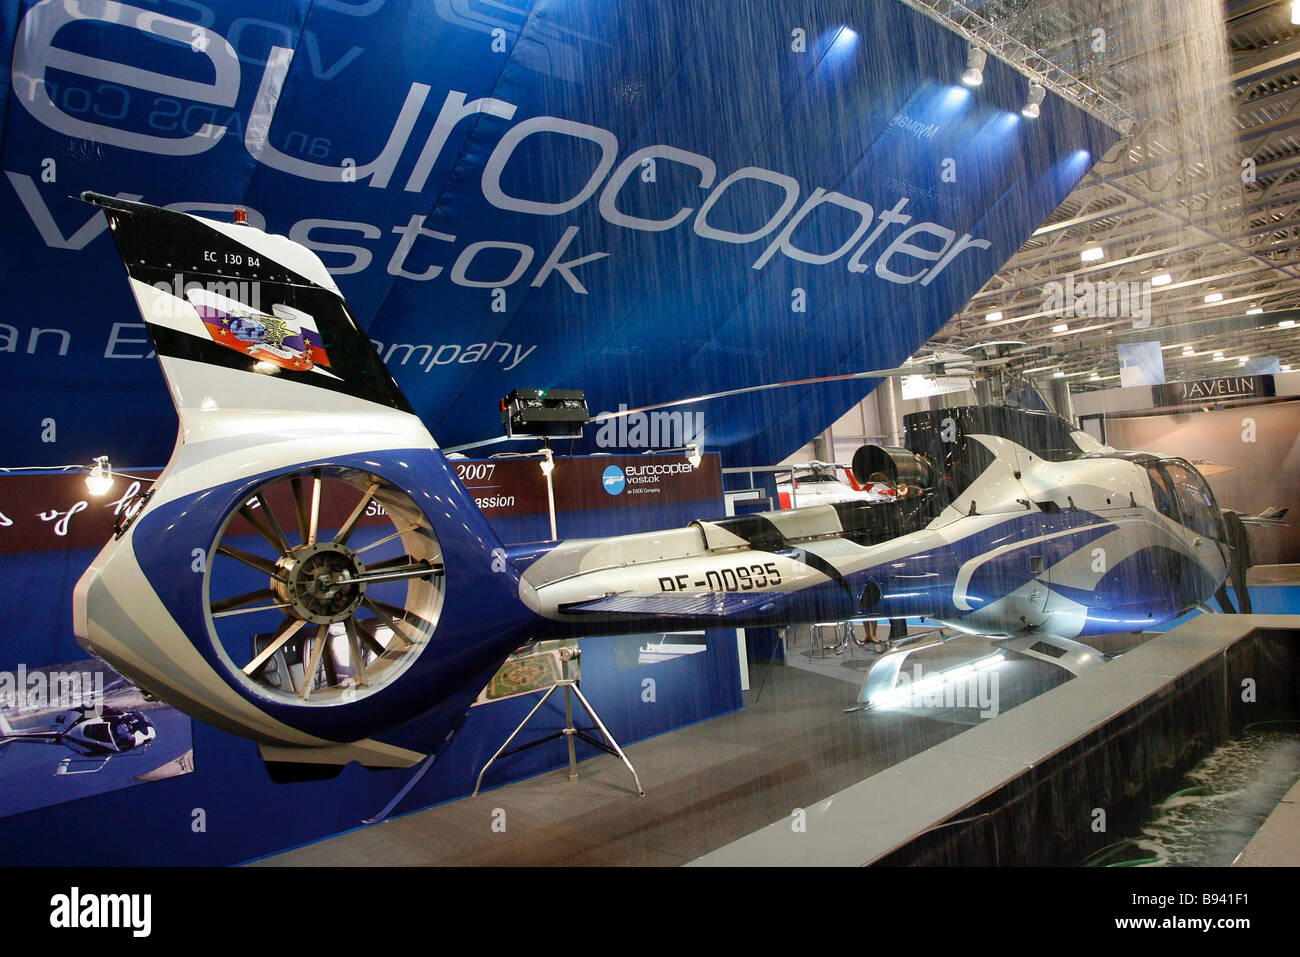 Eurocopter Vostok presented an ES130 B4 business class helicopter of high quality at the 2nd International Business Aviation Stock Photo